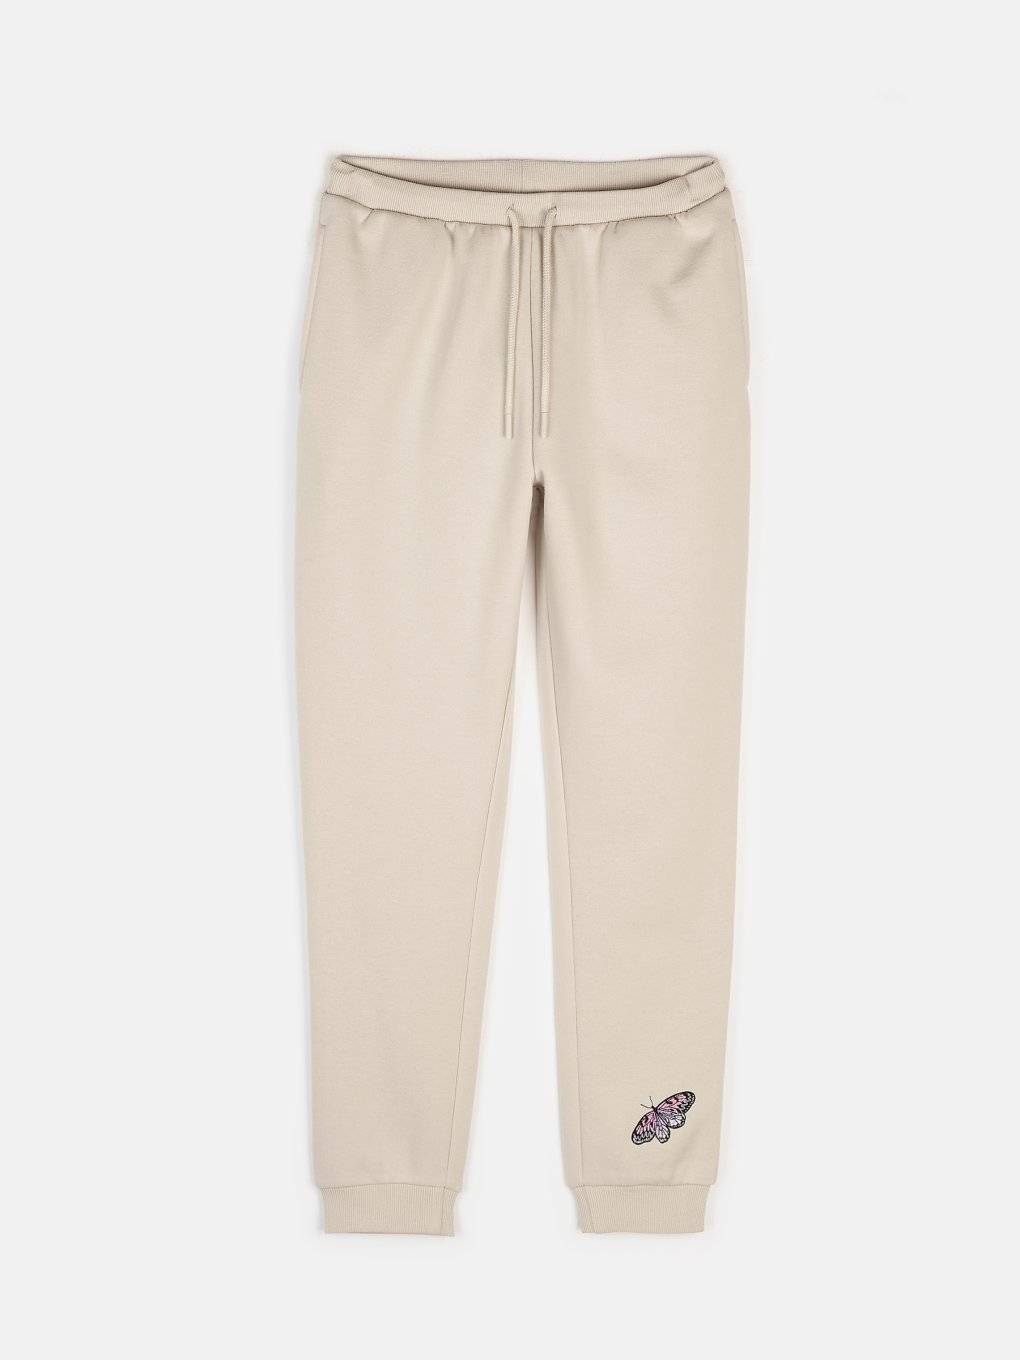 Sweatpants with butterfly embro